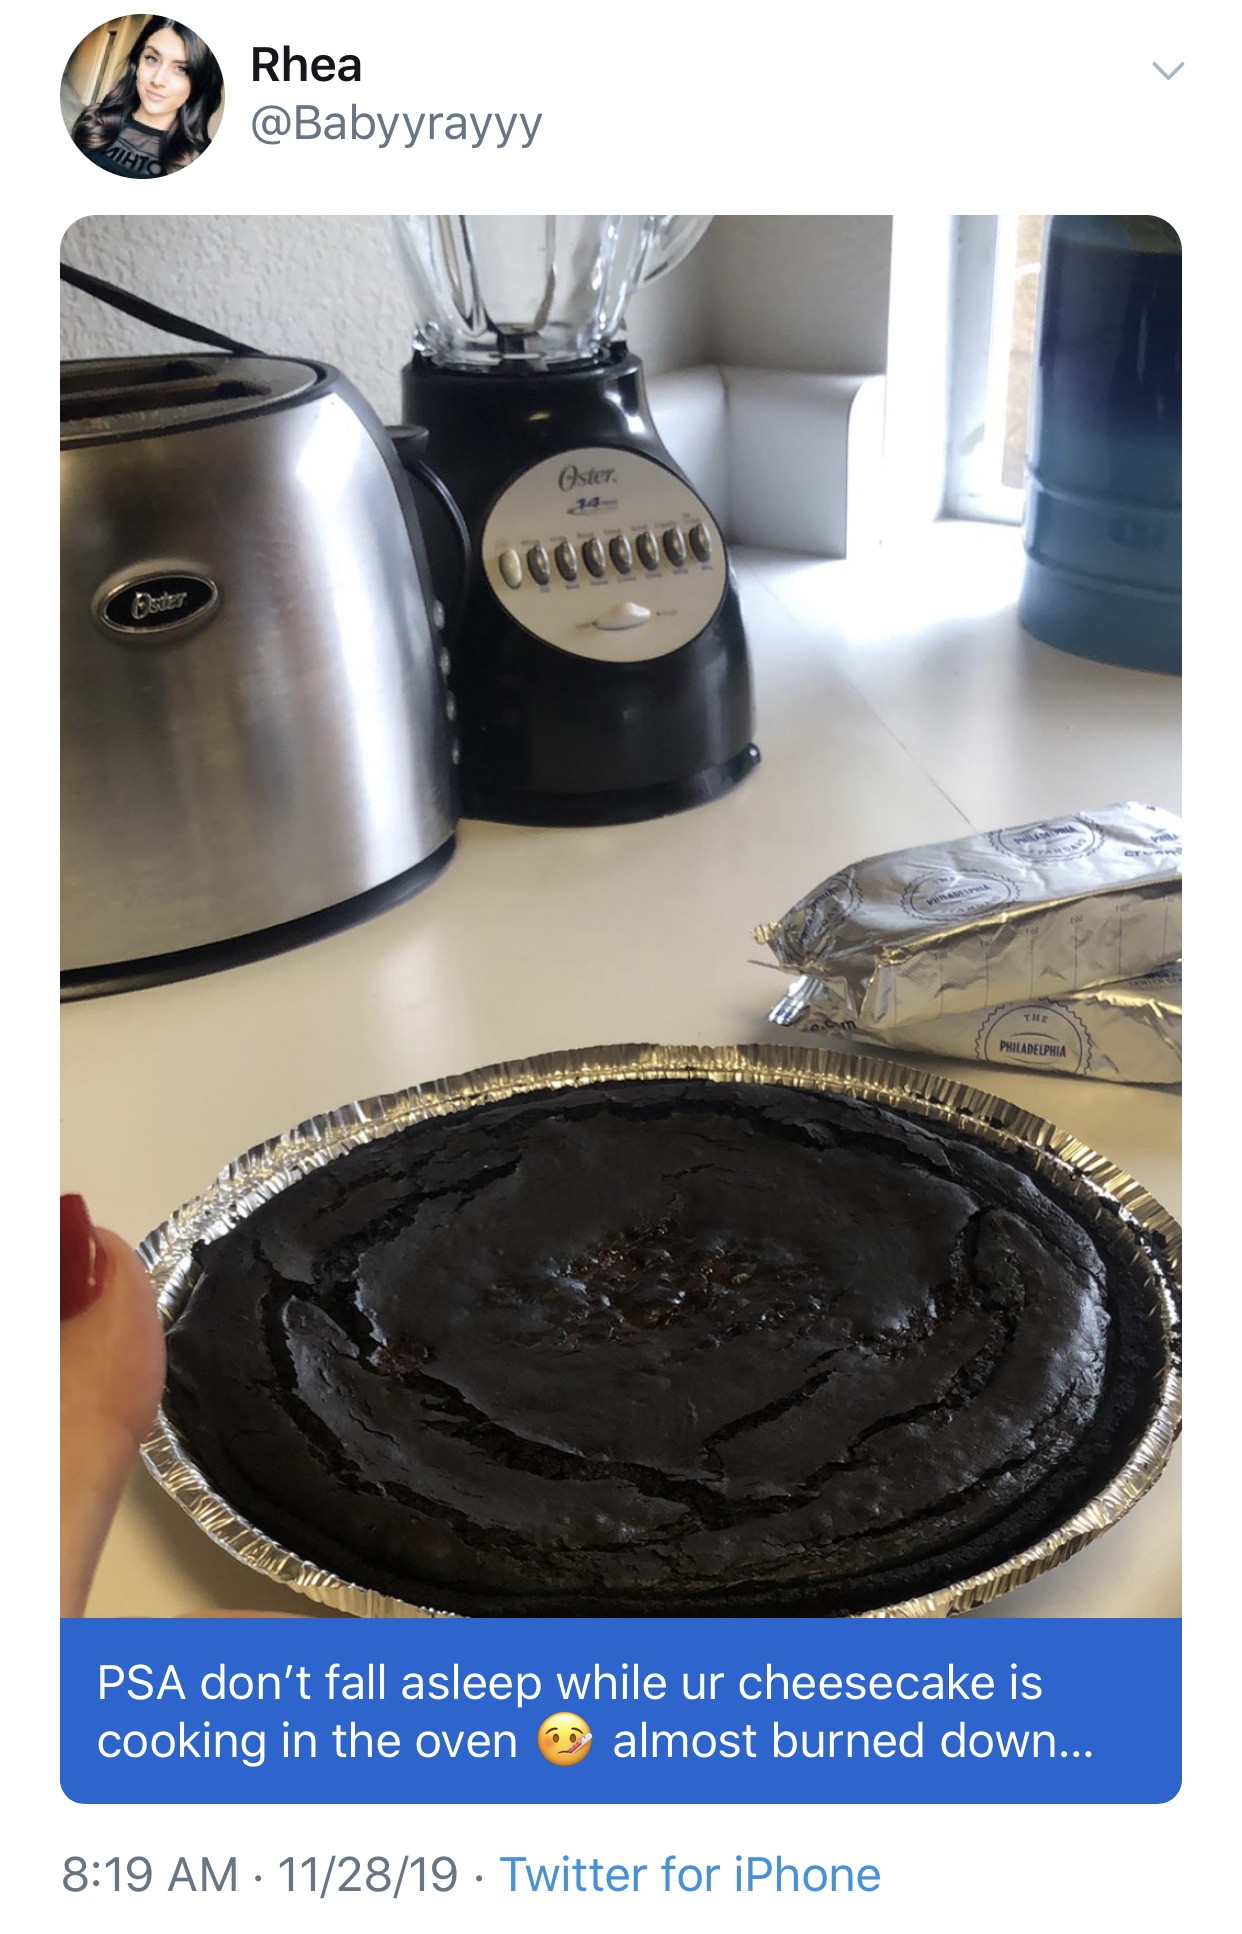 cookware and bakeware - Rhea Cs Psa don't fall asleep while ur cheesecake is cooking in the oven almost burned down... 112819 Twitter for iPhone